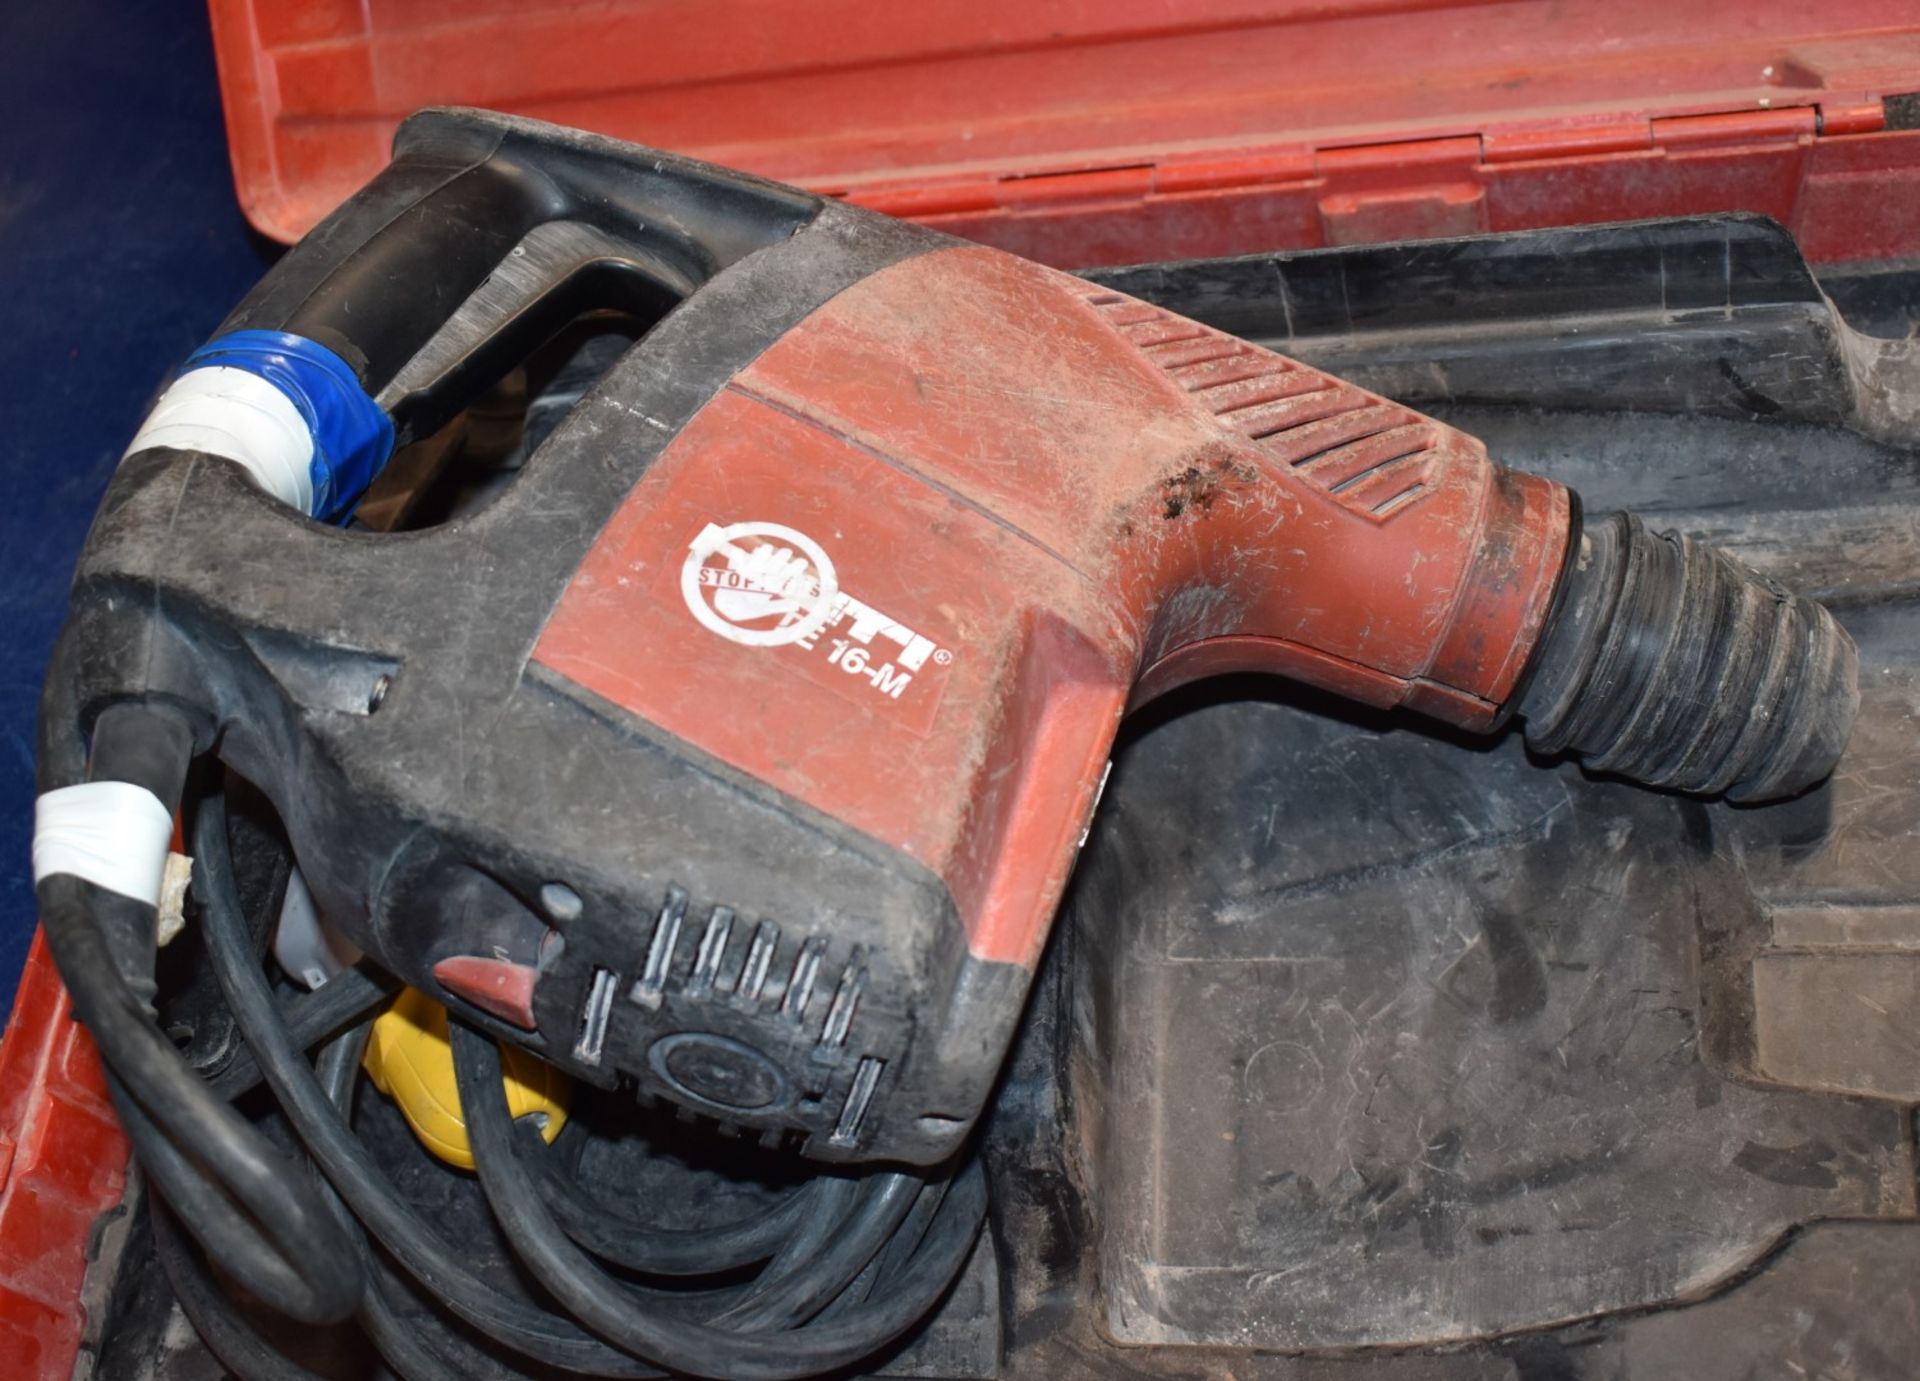 1 x Hilti TE 16M 110v Hammer Drill With Carry Case PME134 - Image 5 of 7